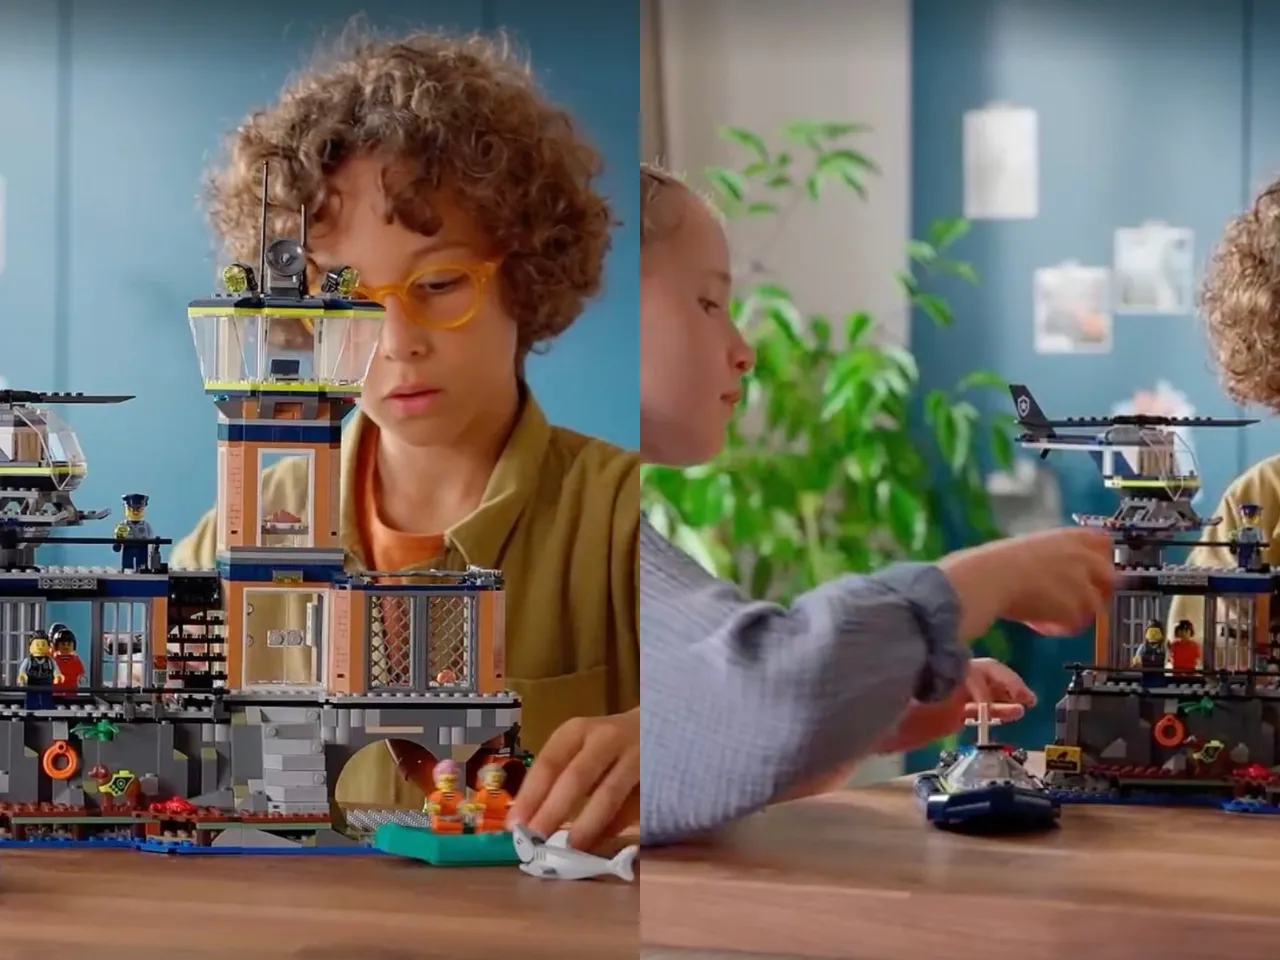 The LEGO® Brand Days campaign aims at making playing an essential component of everyday life